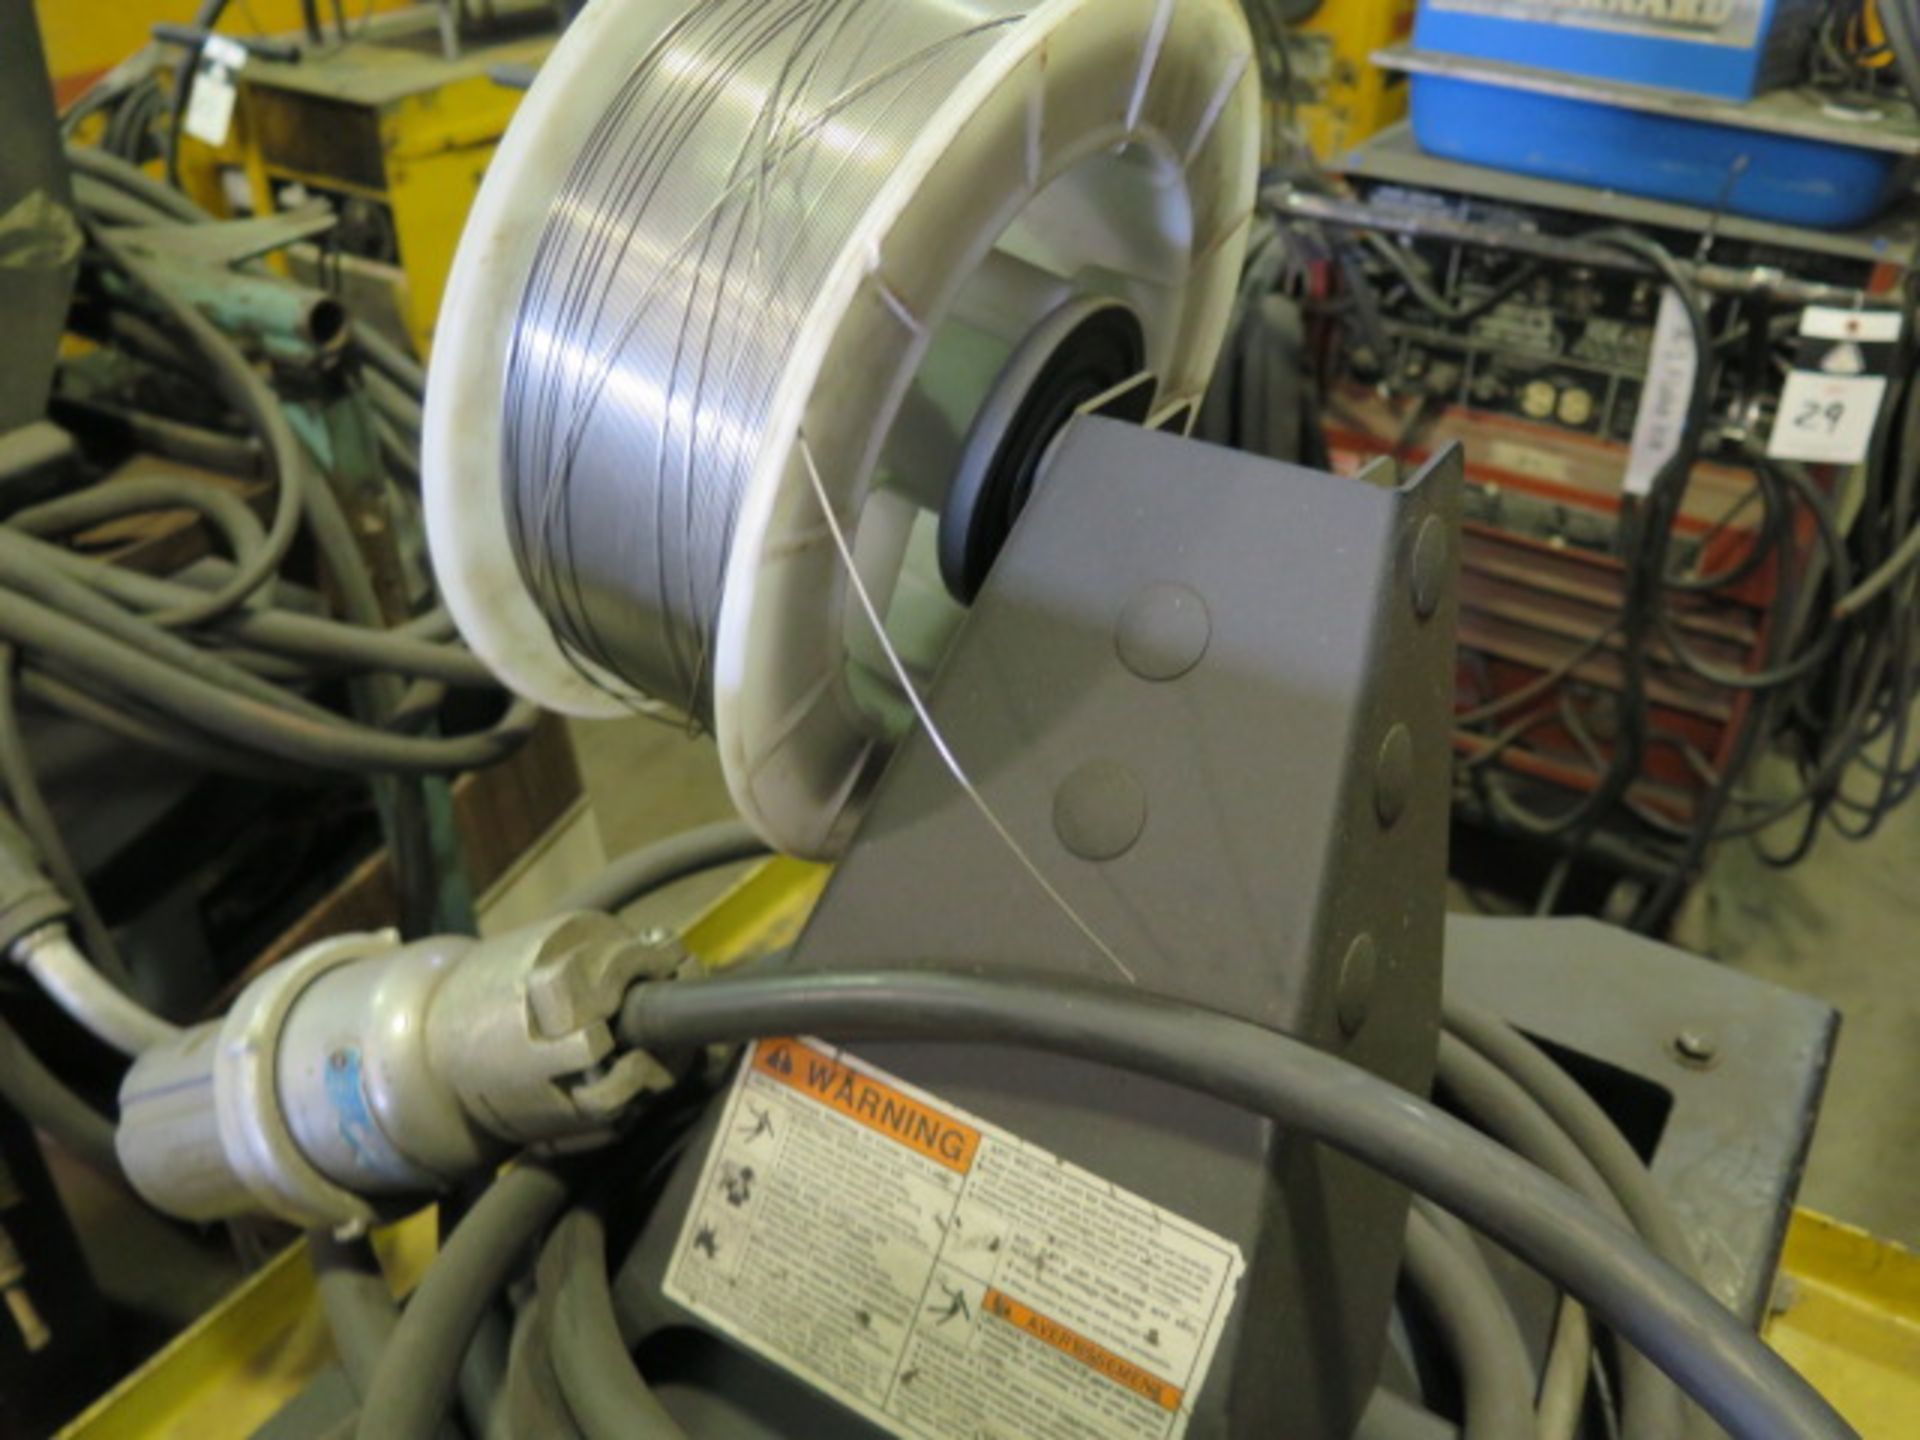 Thermal Arc 400MST Arc Welding Power Source w/ VA2000 Wire Feed (SOLD AS-IS - NO WARRANTY) - Image 7 of 8